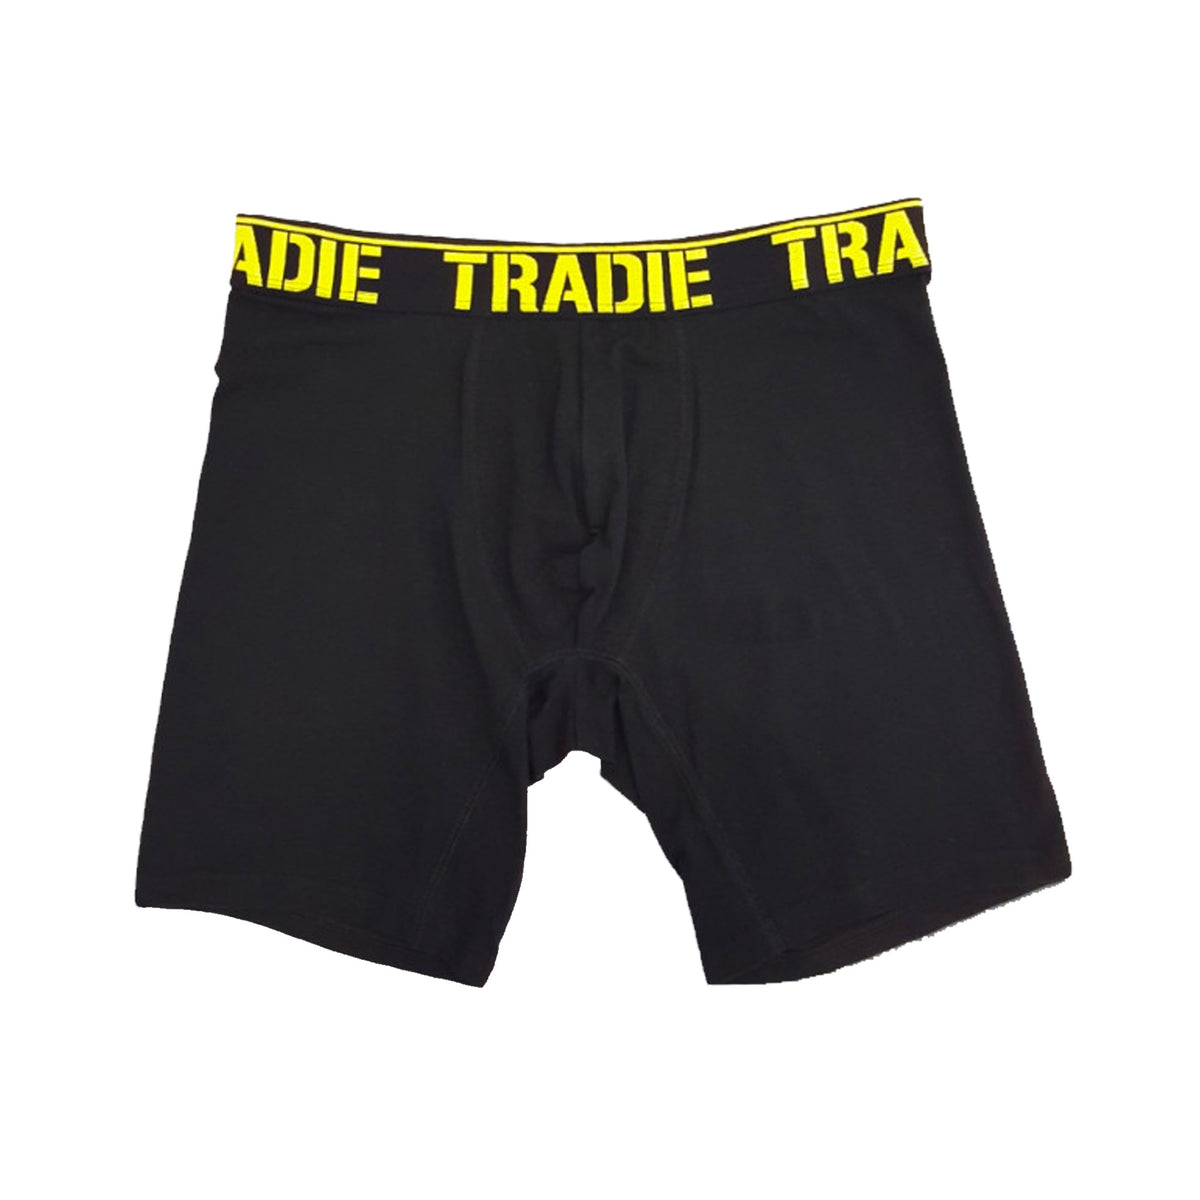 Tradie Men's Fitted Microfibre Trunk 3 Pack - Blue